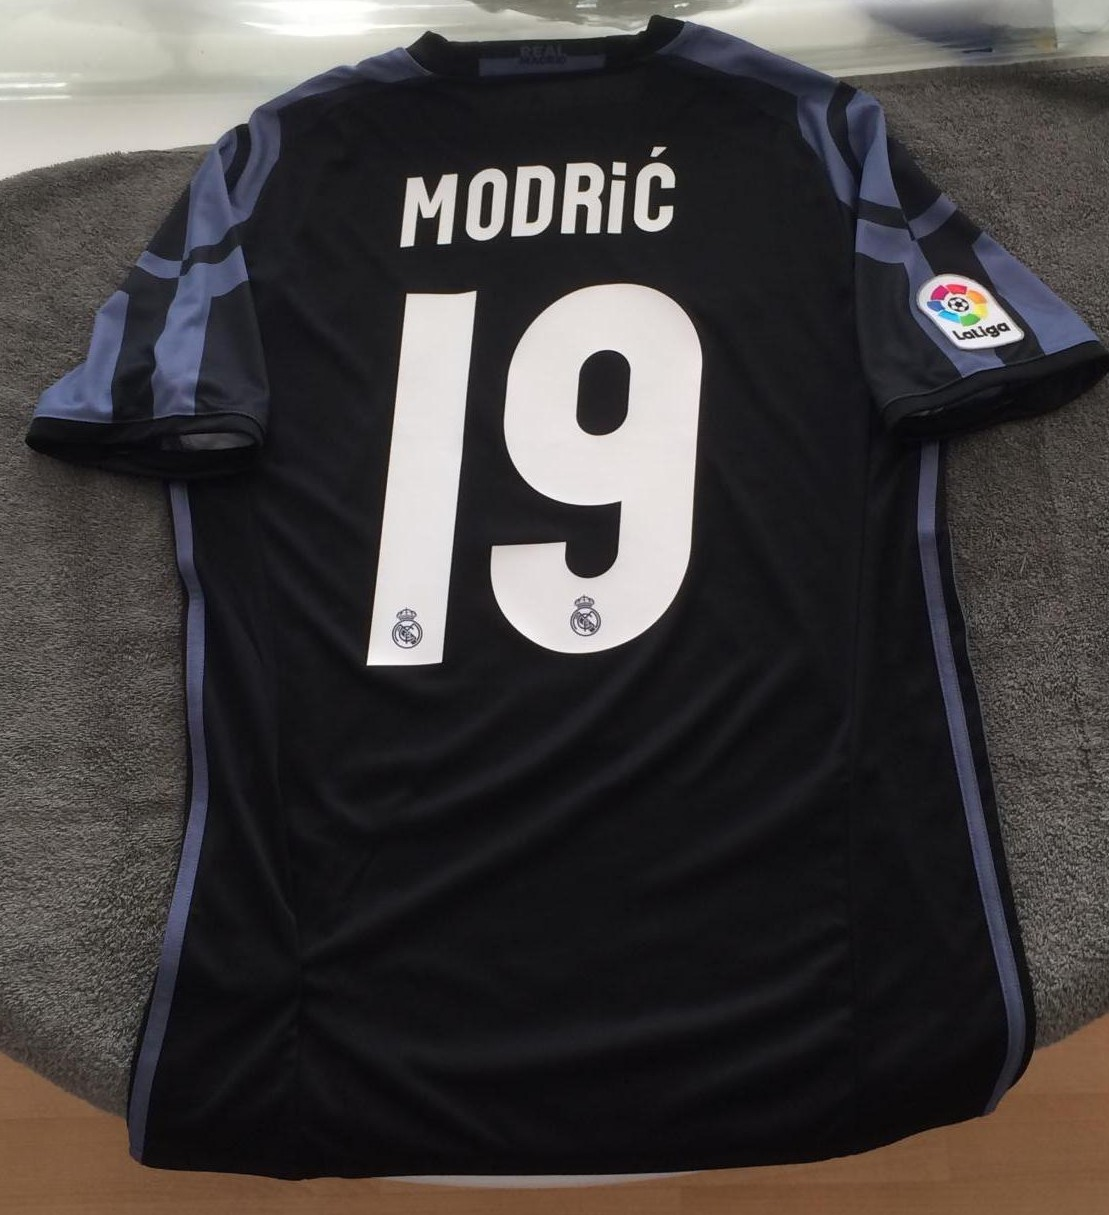 Real Madrid Jersey (home, away, third)